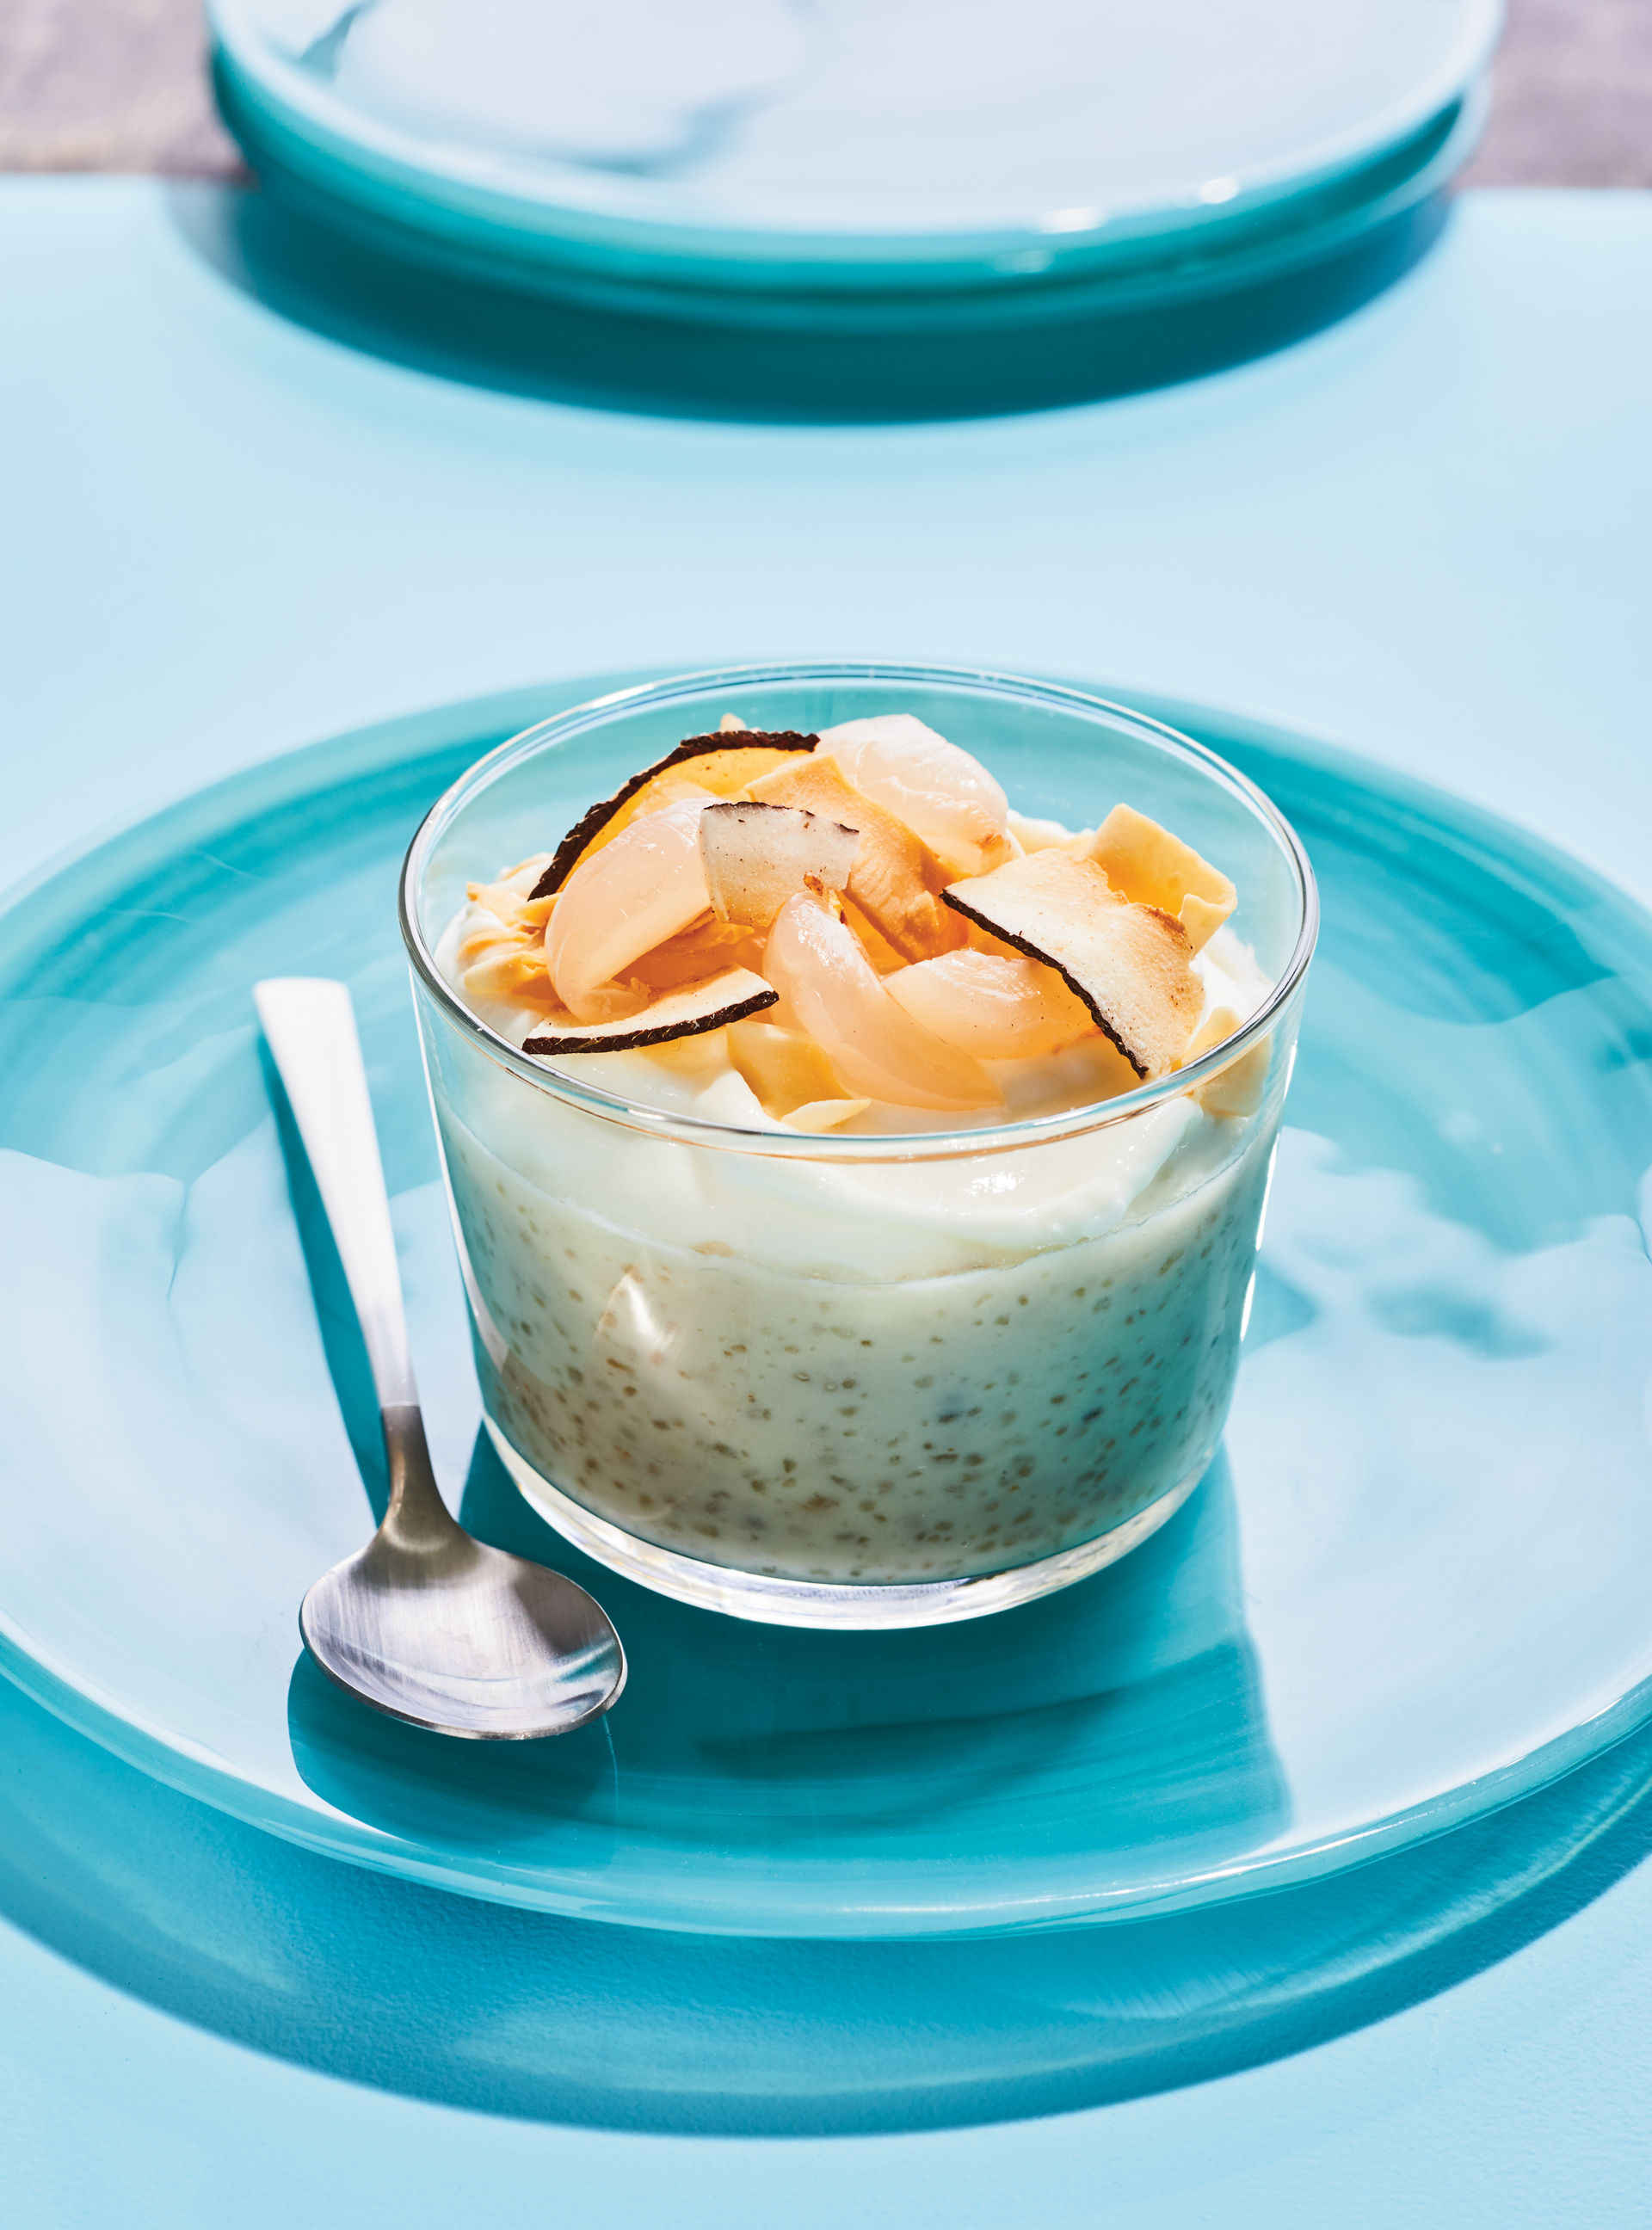 Lychee-Coconut Pudding